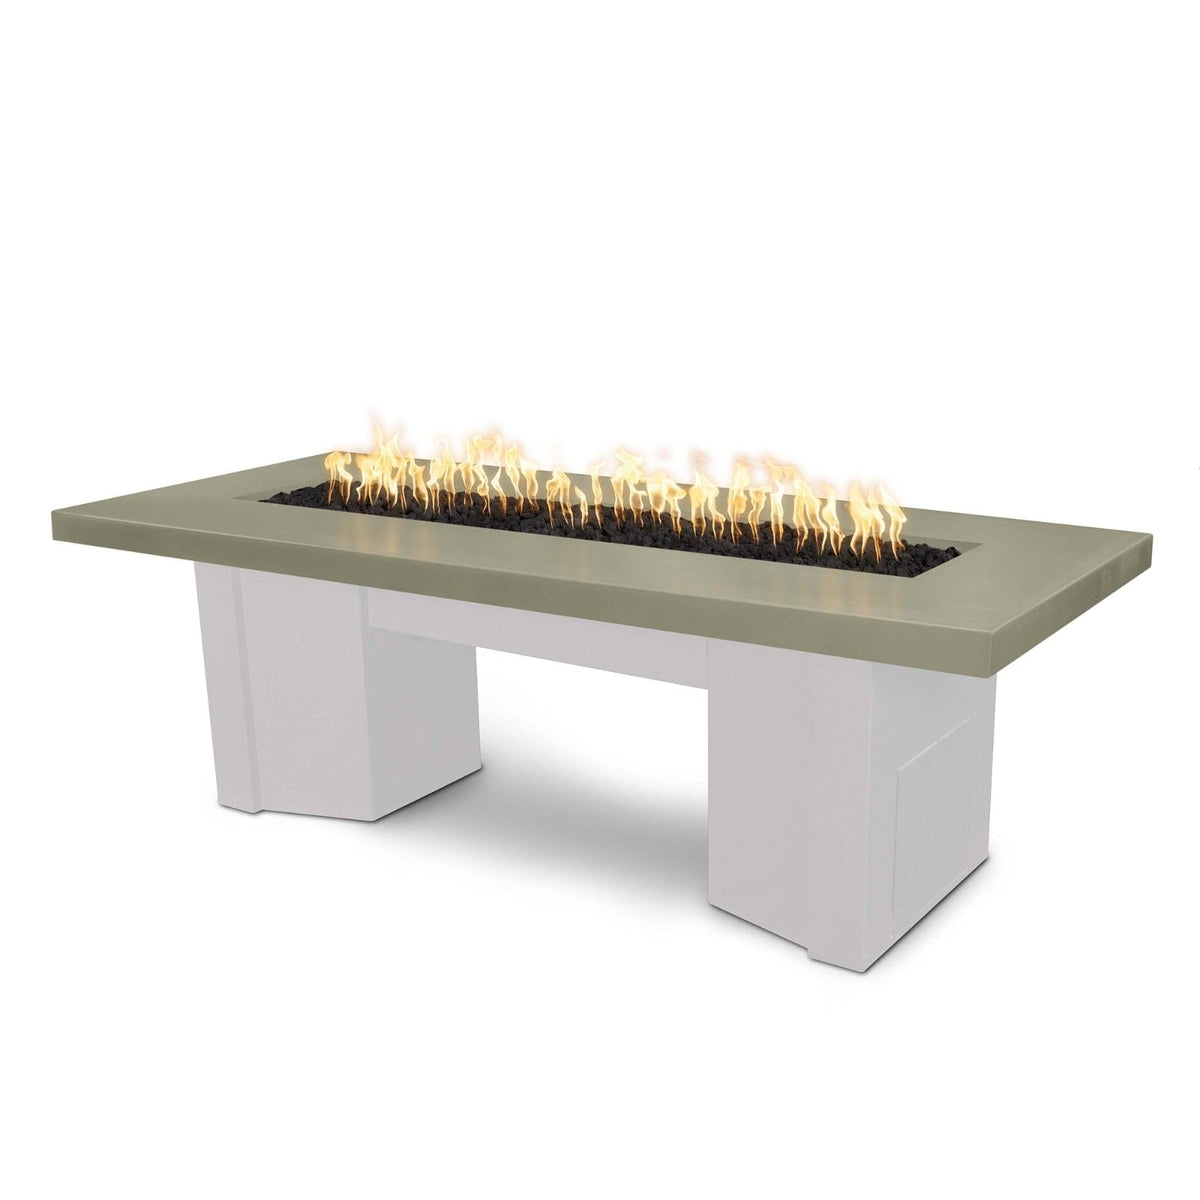 The Outdoor Plus Fire Features Ash (-ASH) / White Powder Coated Steel (-WHT) The Outdoor Plus 60&quot; Alameda Fire Table Smooth Concrete in Liquid Propane - Flame Sense System with Push Button Spark Igniter / OPT-ALMGFRC60FSEN-LP